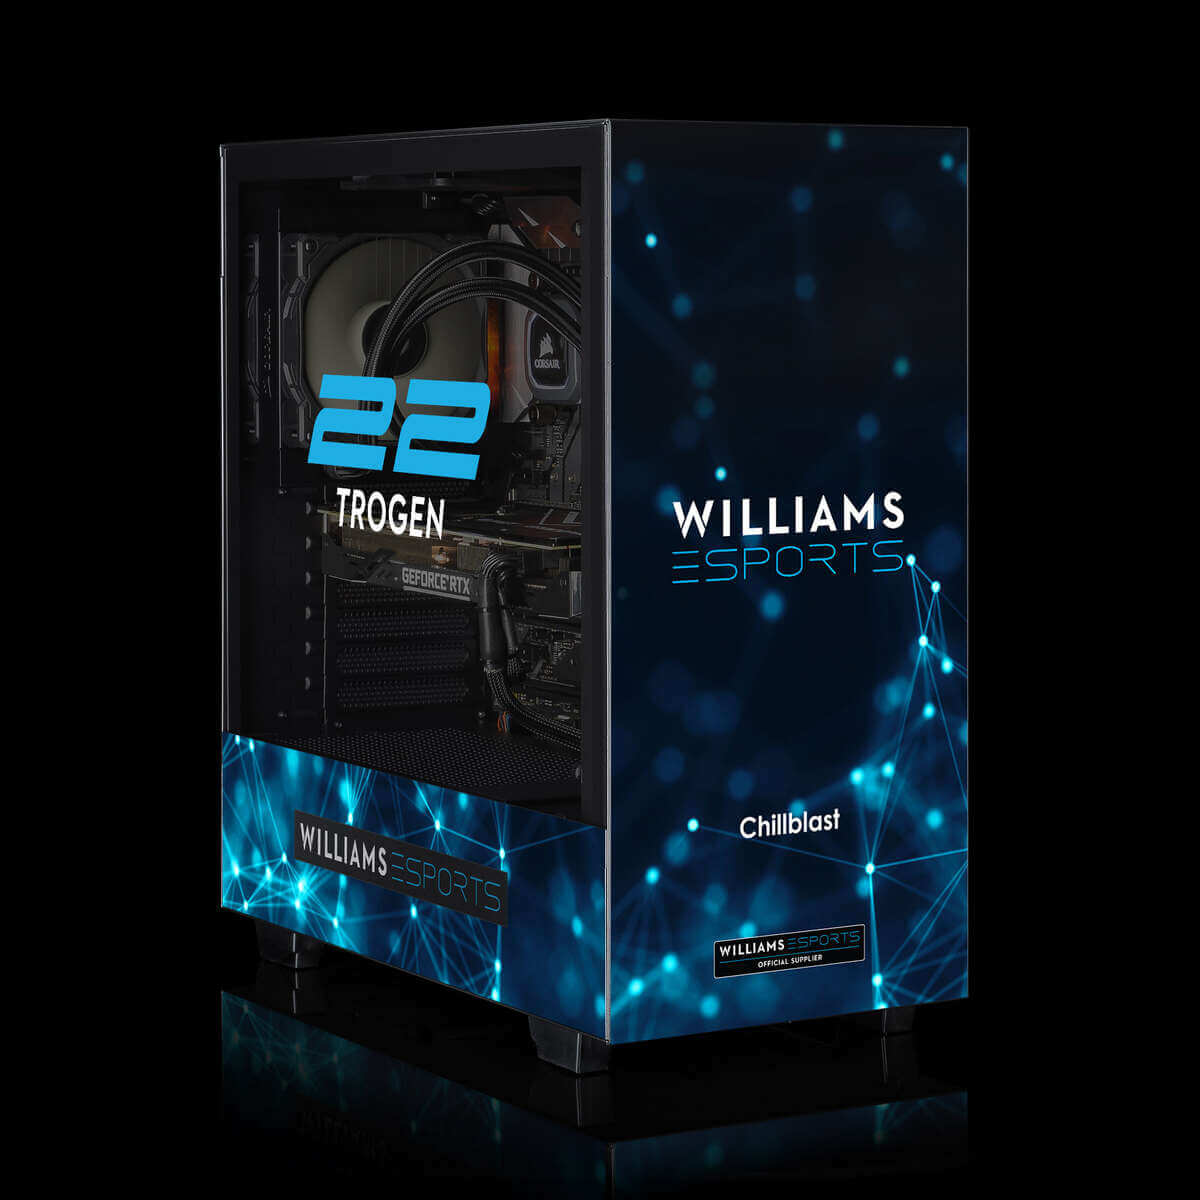 Image of the Chillblast Official Williams Esports Ultimate Gaming PC 